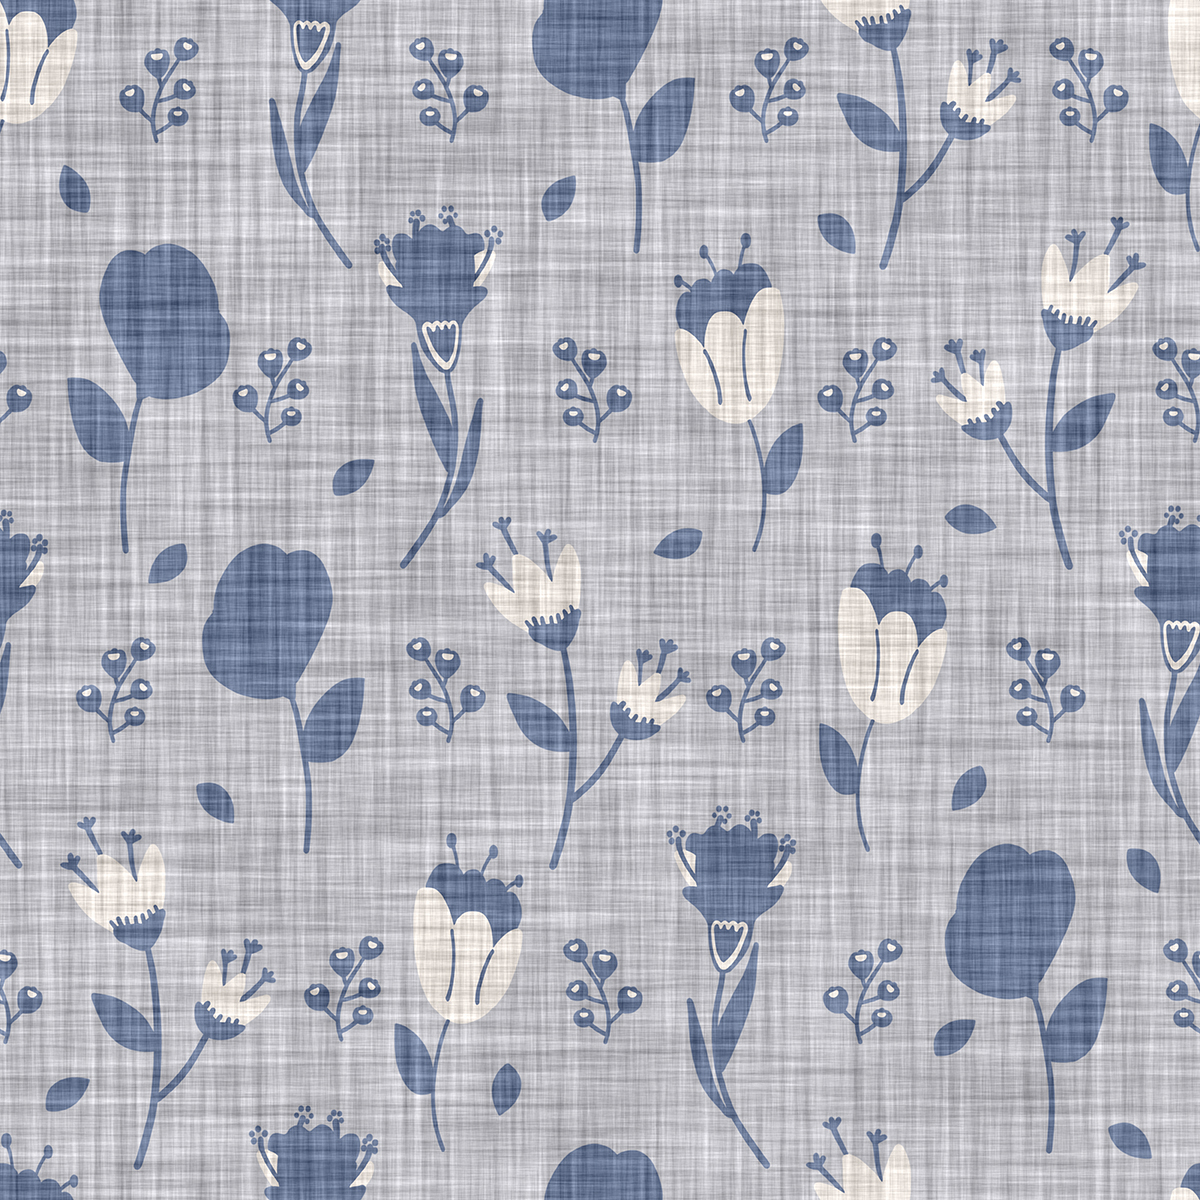 A blue and white floral pattern